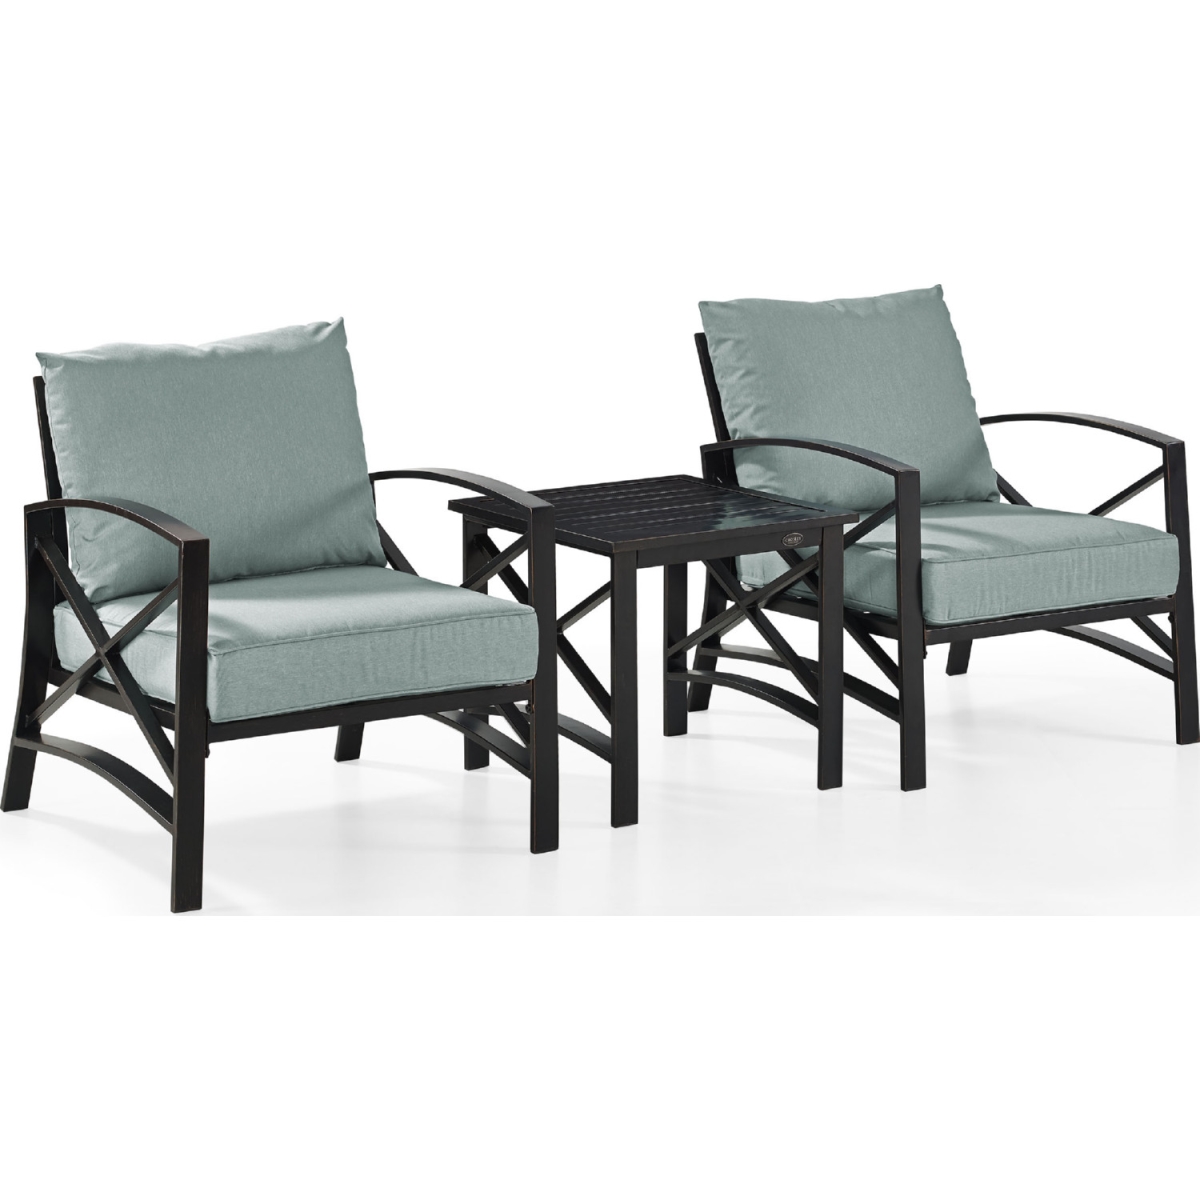 Ko60016bz-mi 3 Piece Kaplan Outdoor Seating Set With Mist Cushion - Two Chairs, Side Table